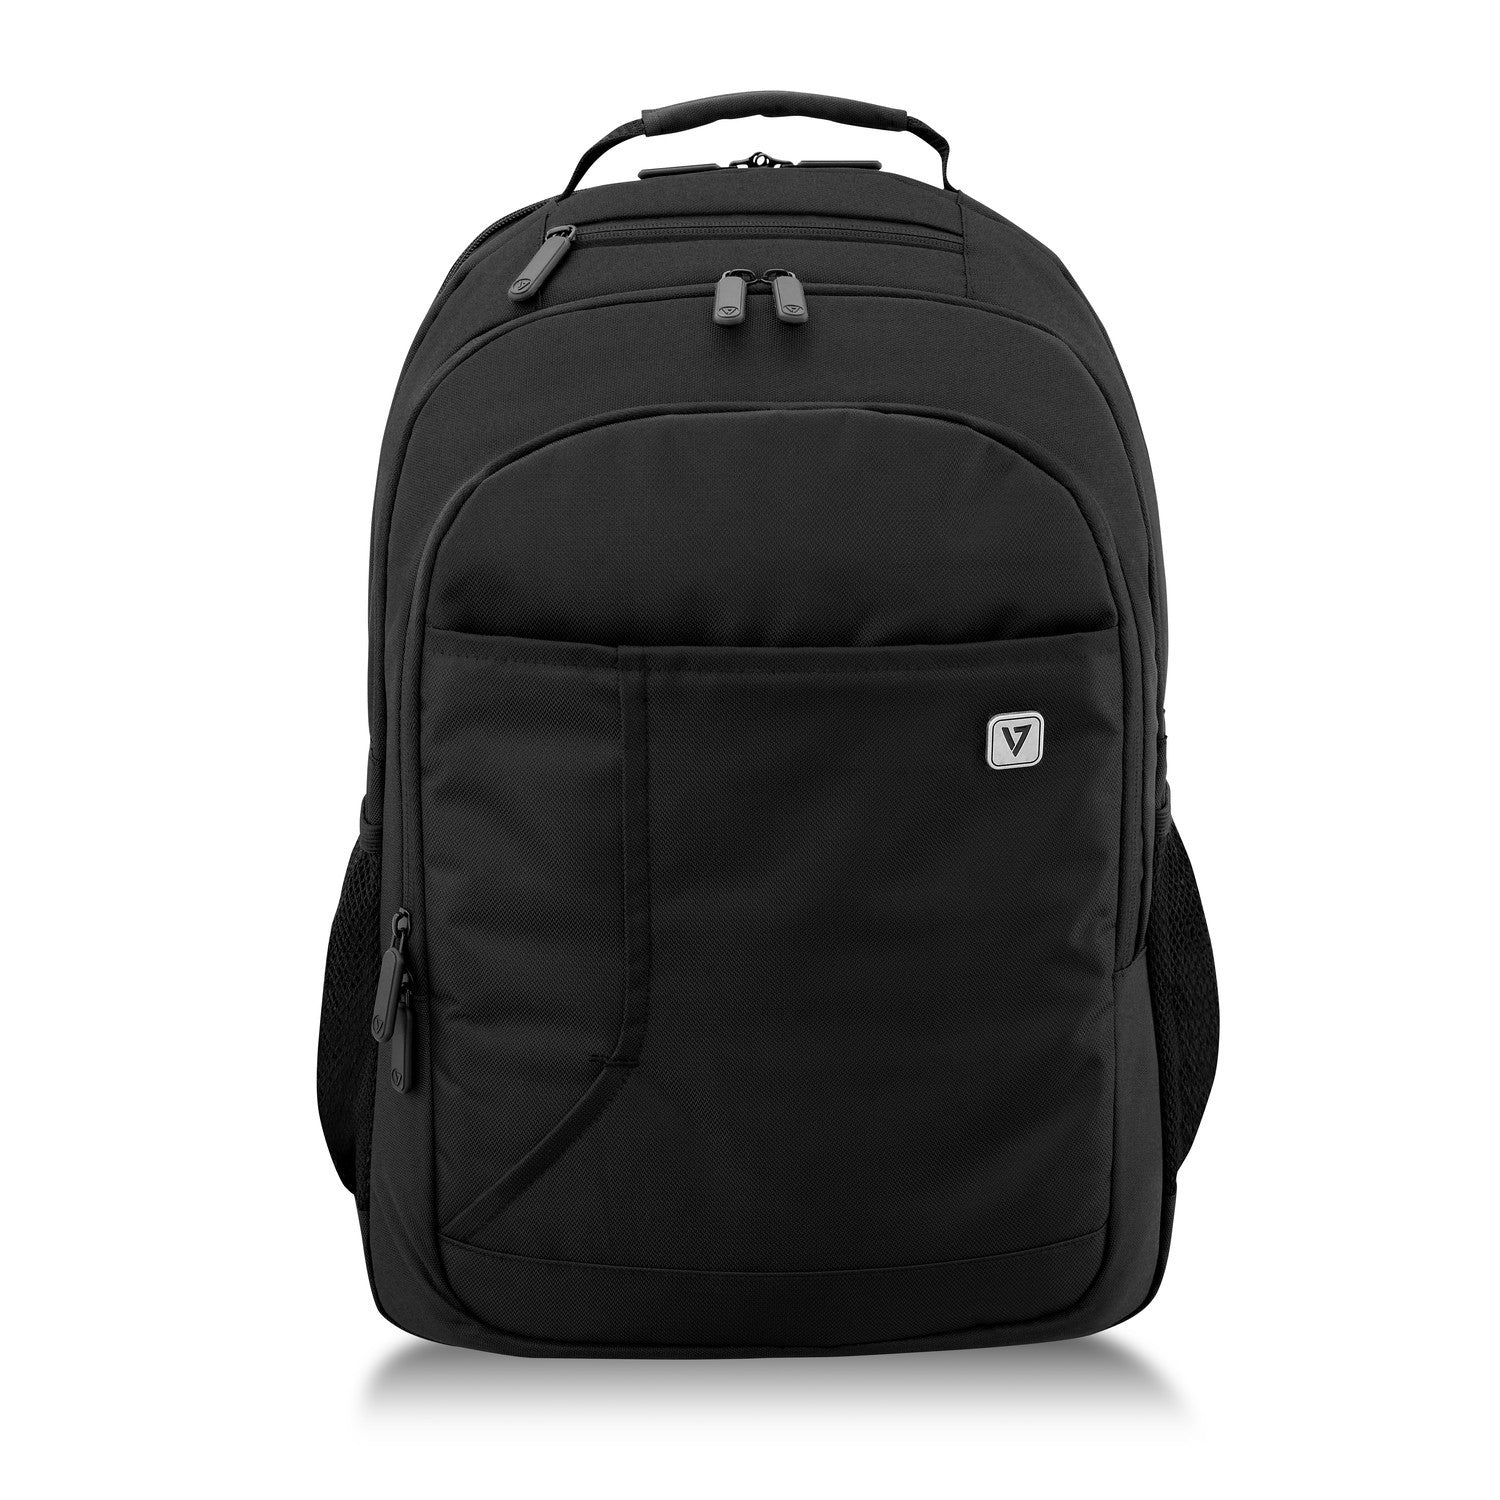 16" Professional Laptop Backpack